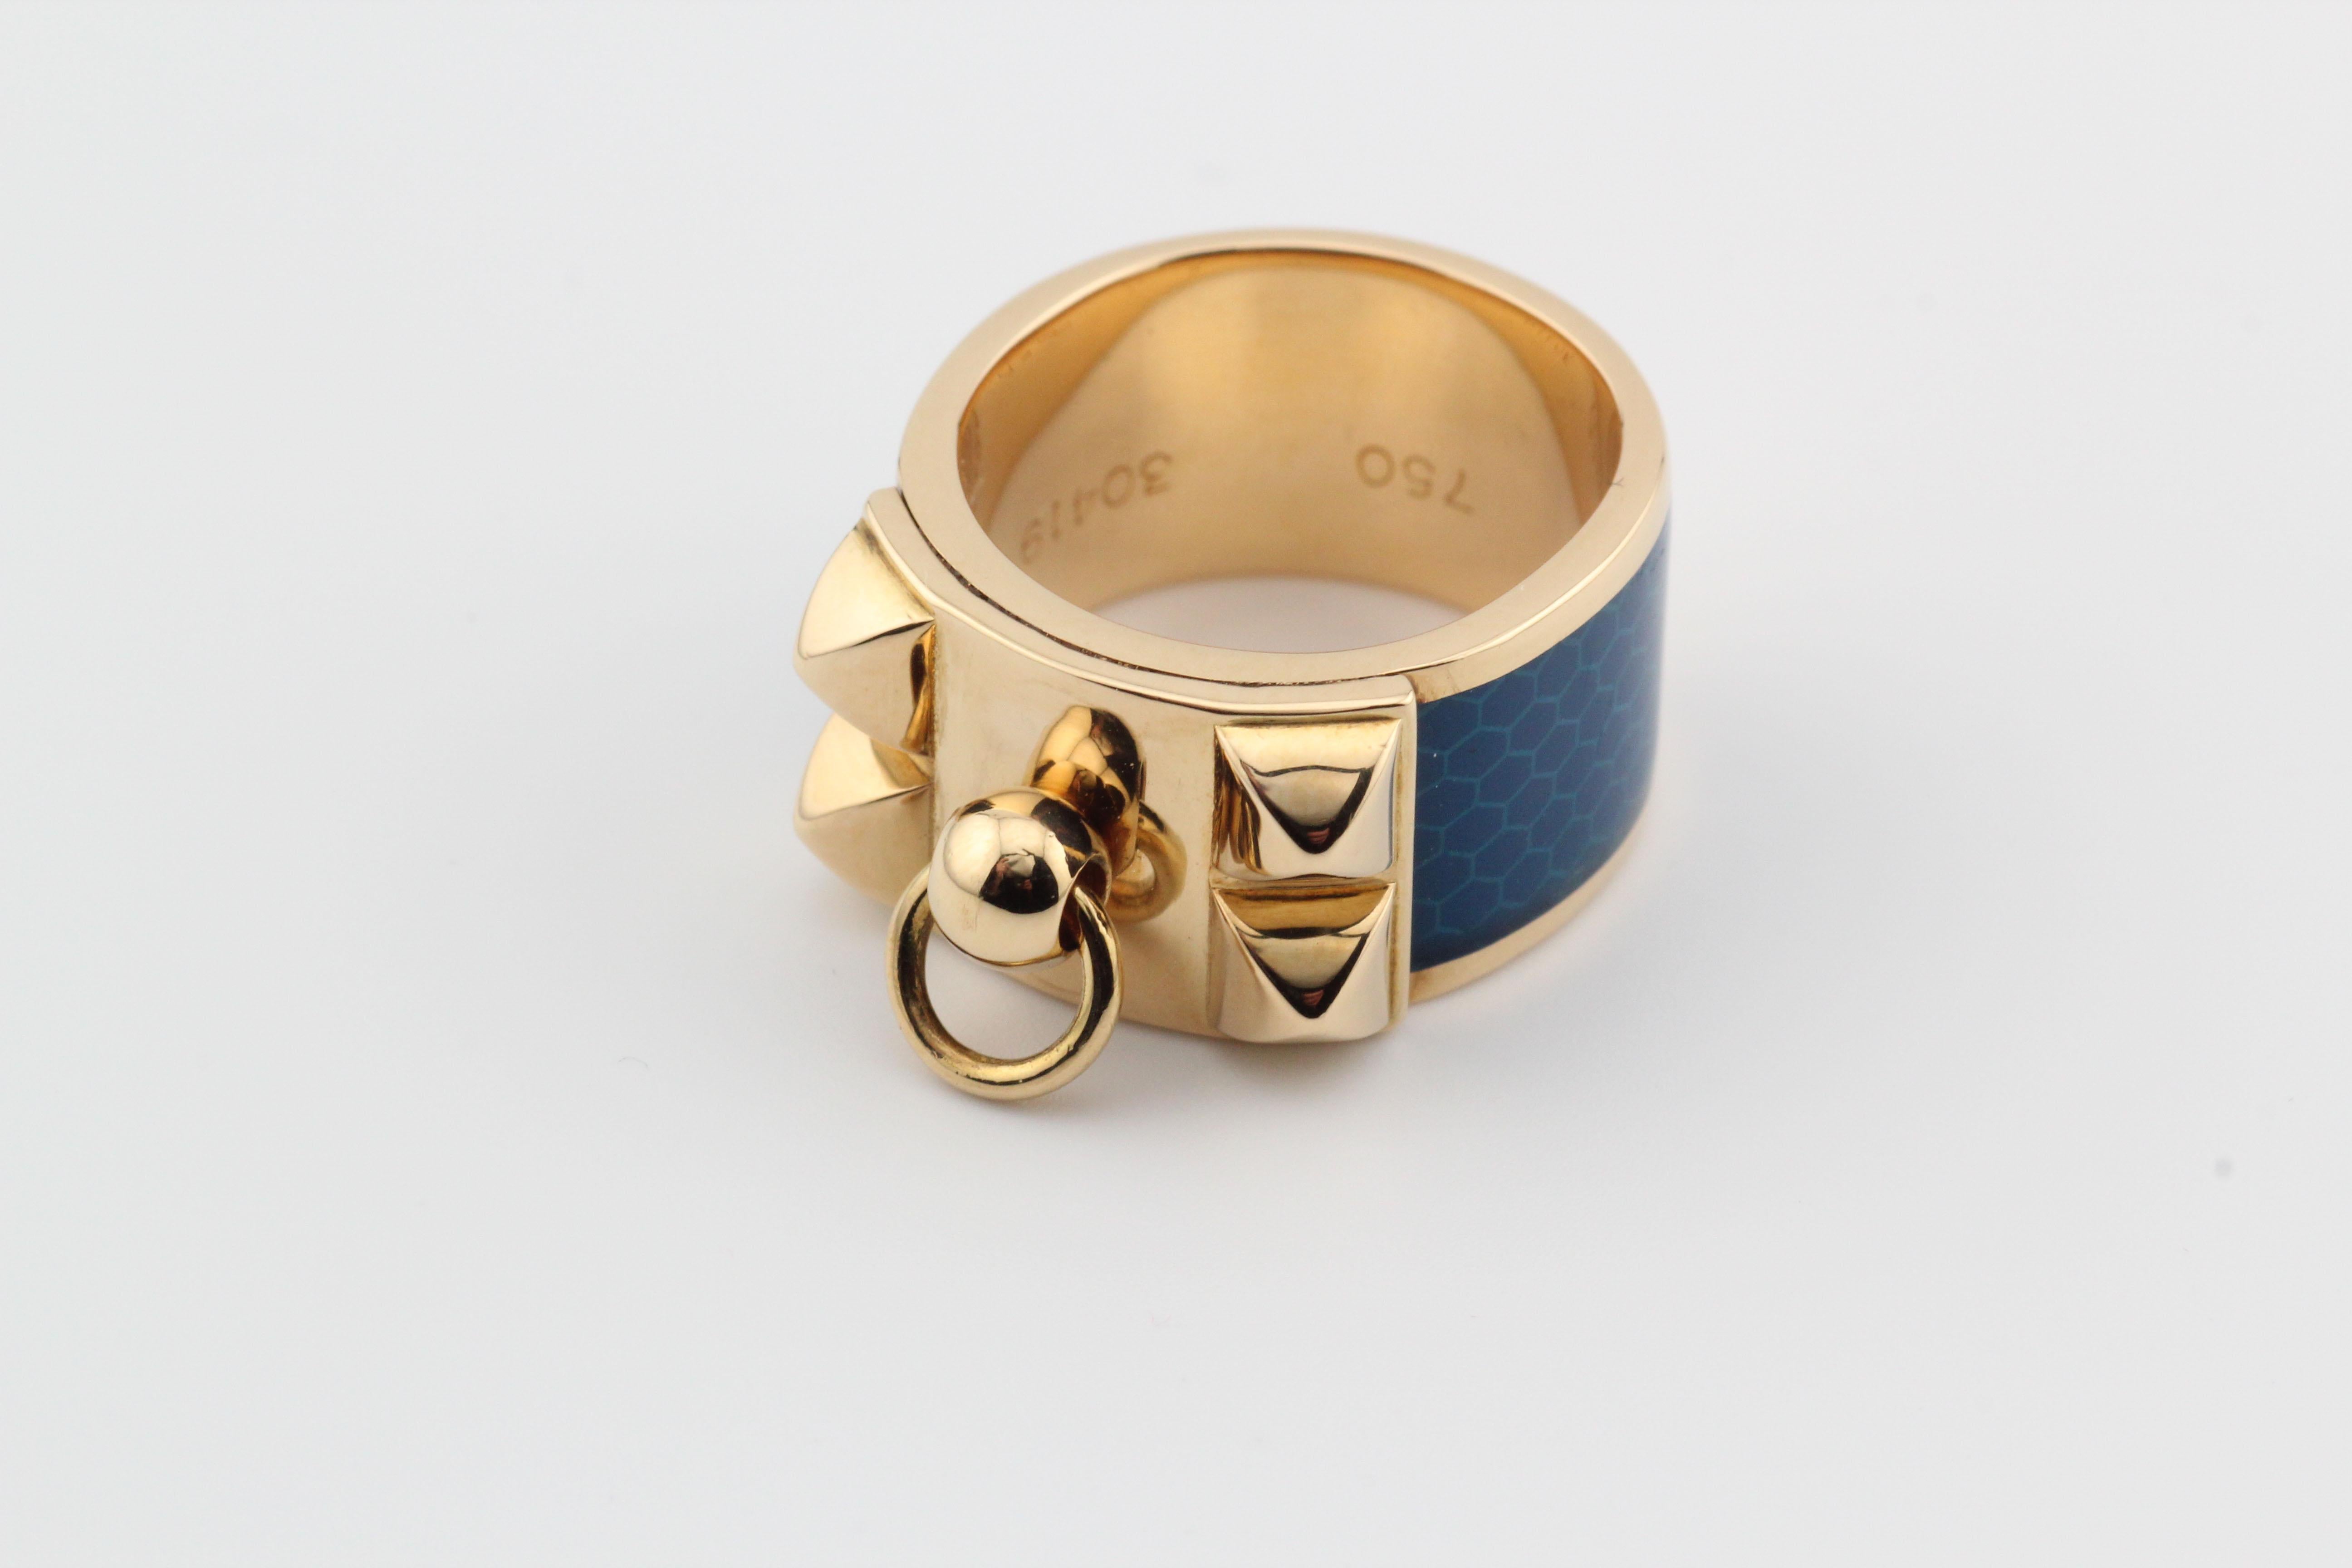 The Hermes Collier de Chien ring is an exquisite piece of jewelry that is both luxurious and elegant. The ring features a beautiful and unique design that is instantly recognizable as Hermes.  

Crafted from high-quality 18k gold, the ring is